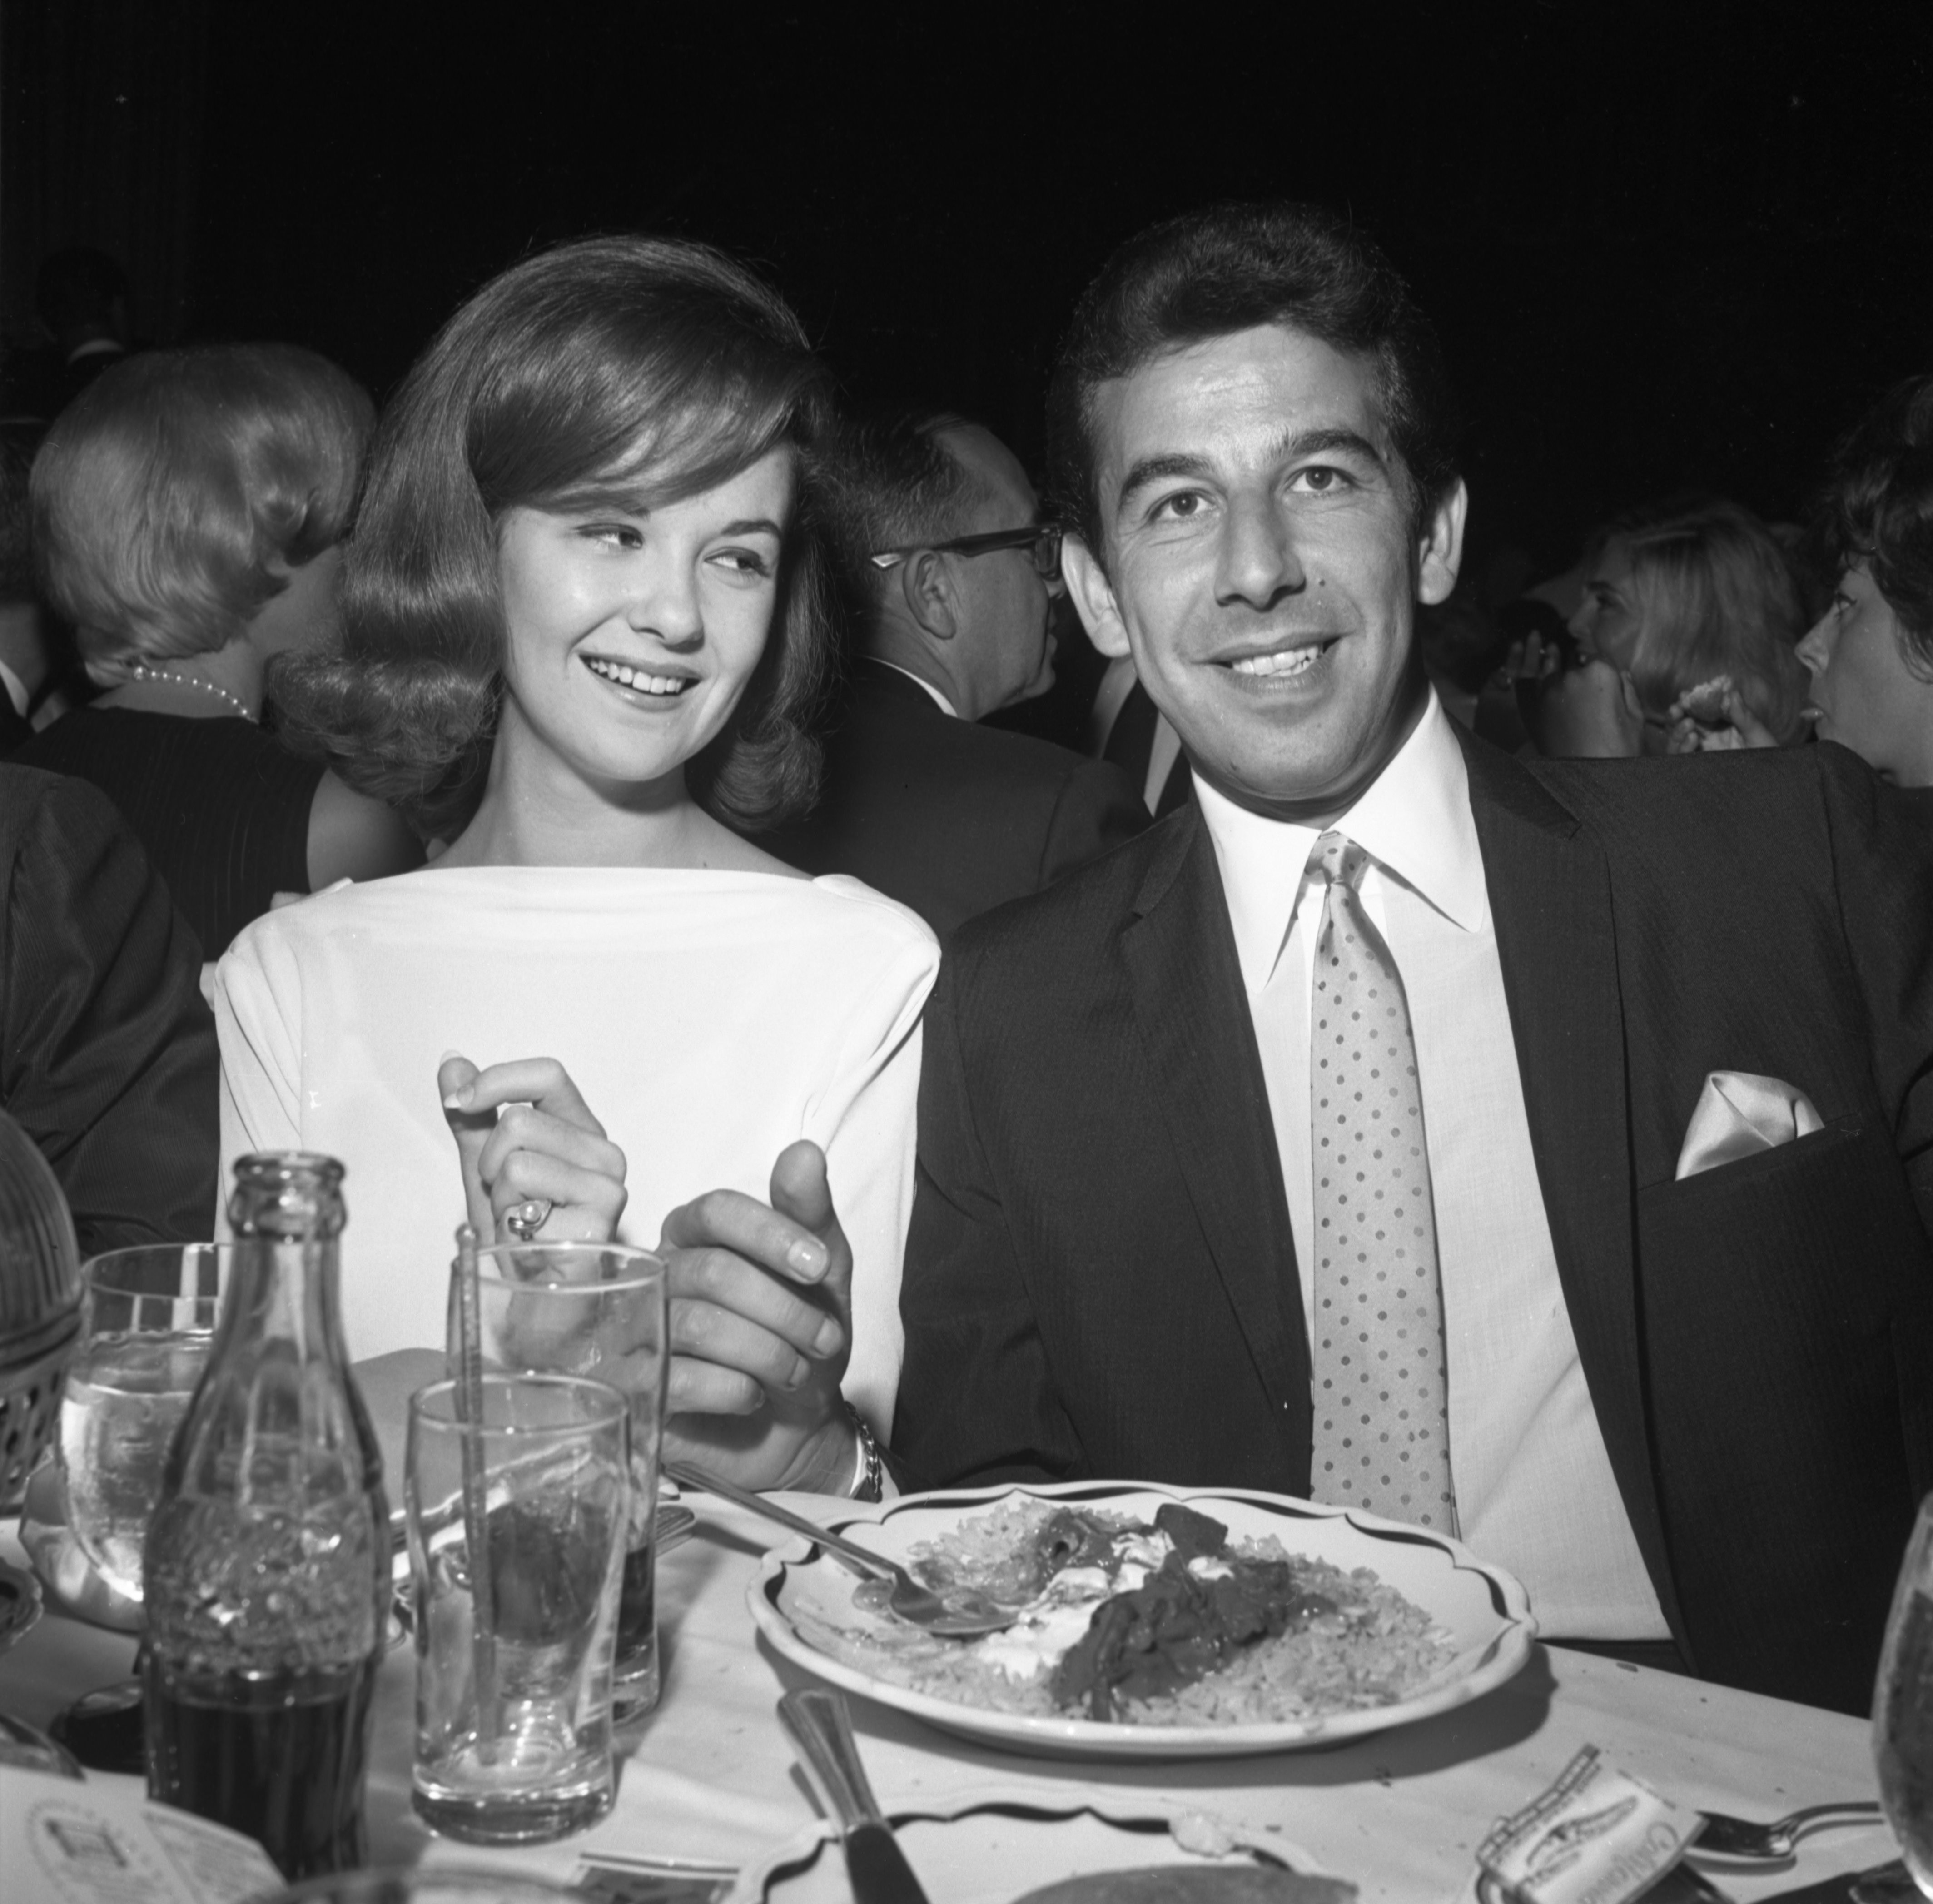  Shelley Fabares and Lou Adler at an event circa 1964 | Source: Getty Images